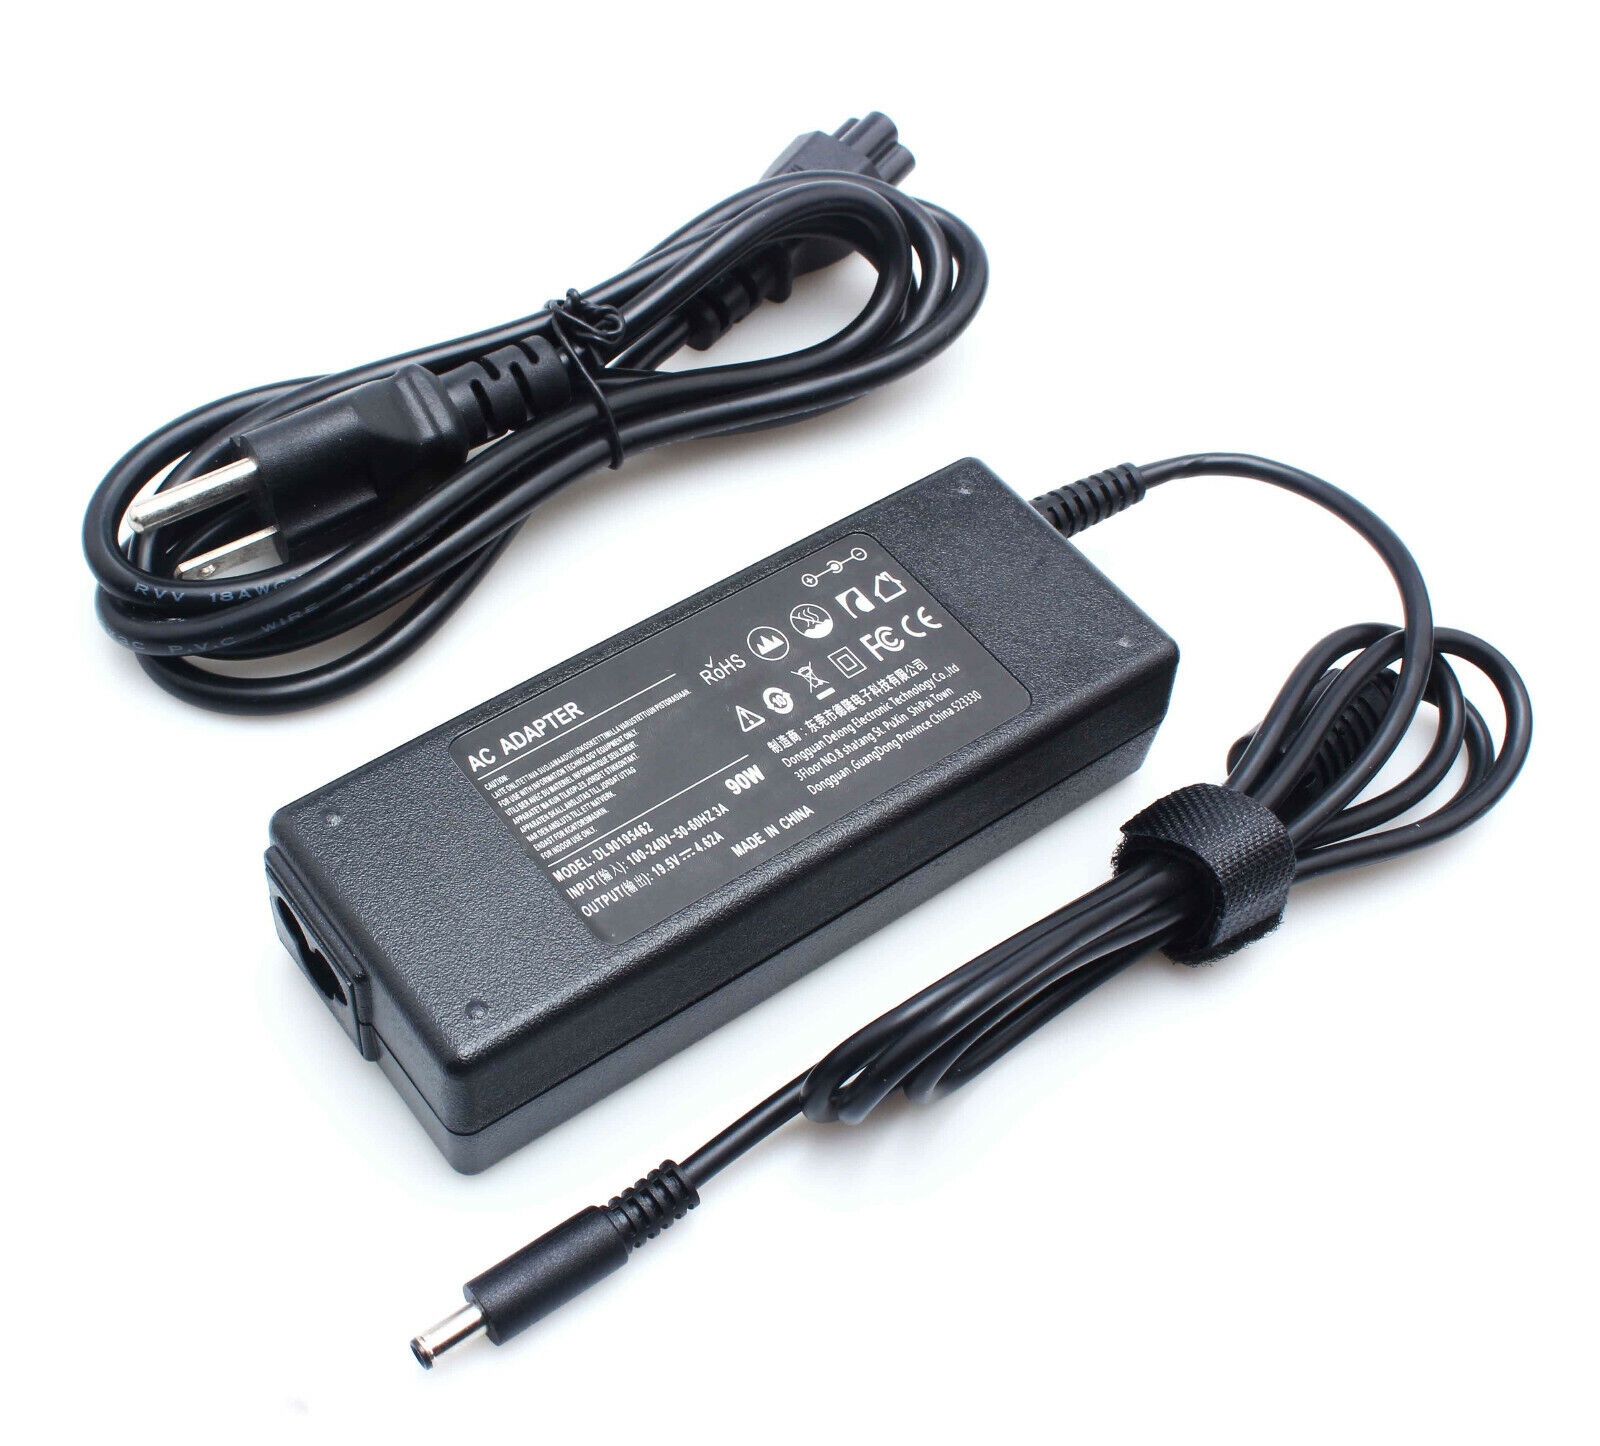 90W 65W Laptop Power Supply Adapter for Dell Inspiron 7791 7700 7590 7500 2-in-1